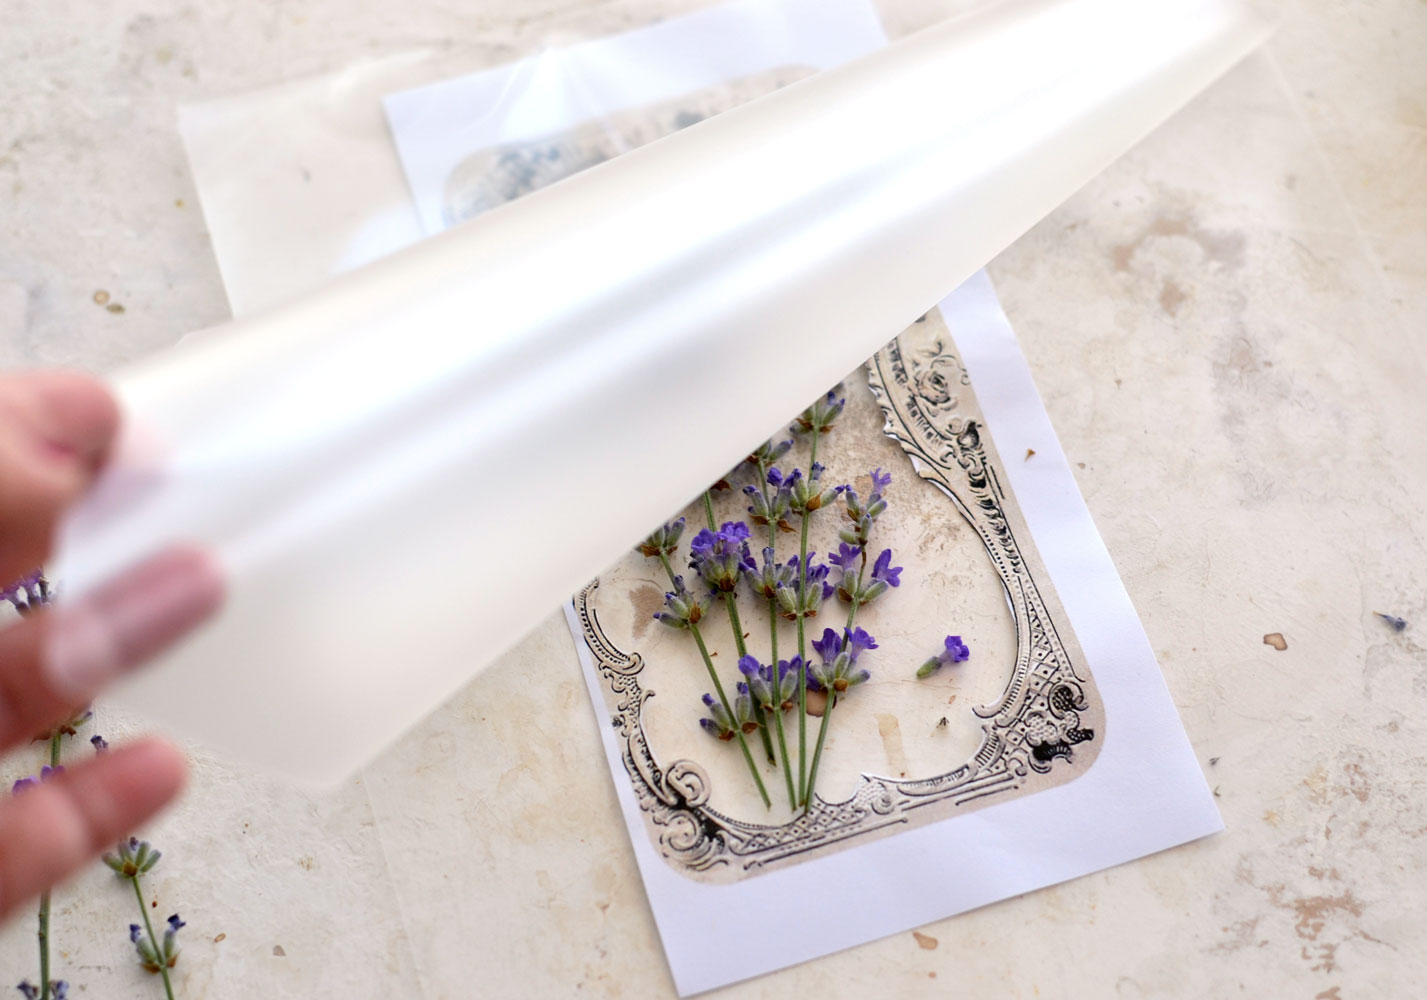 Laminating dried flowers